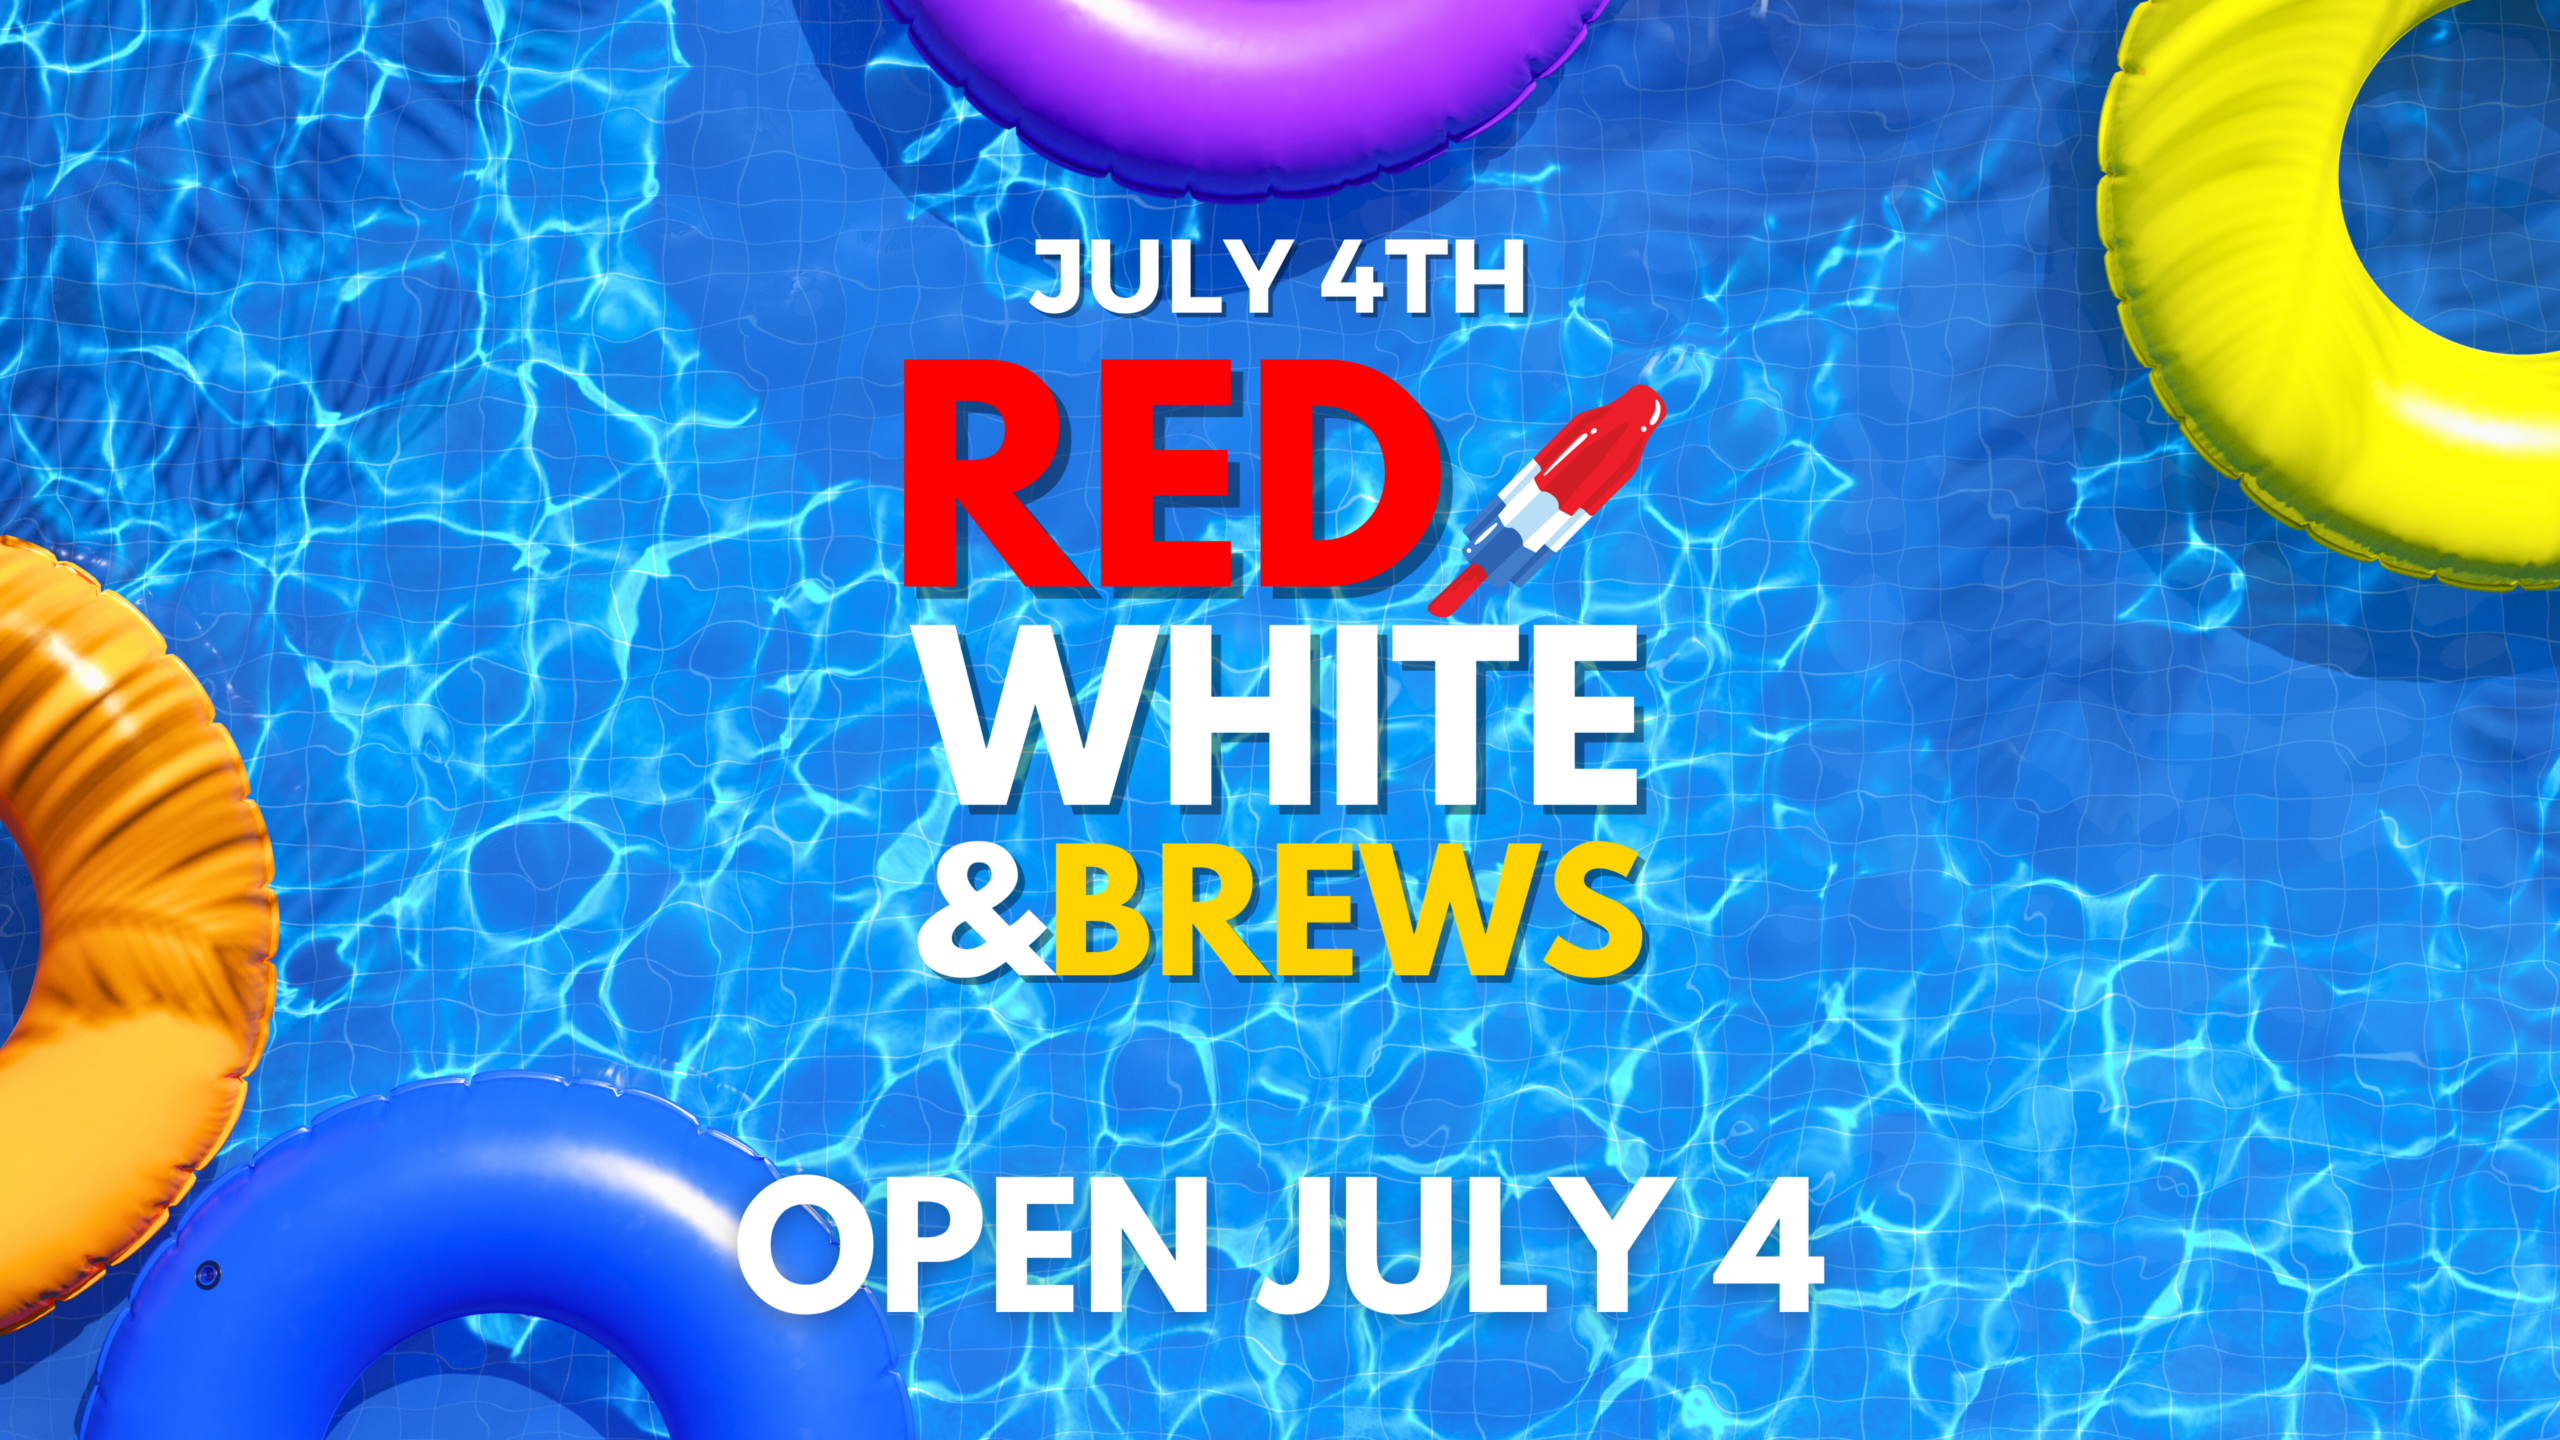 Red White & Brews at On Rotation on July 4